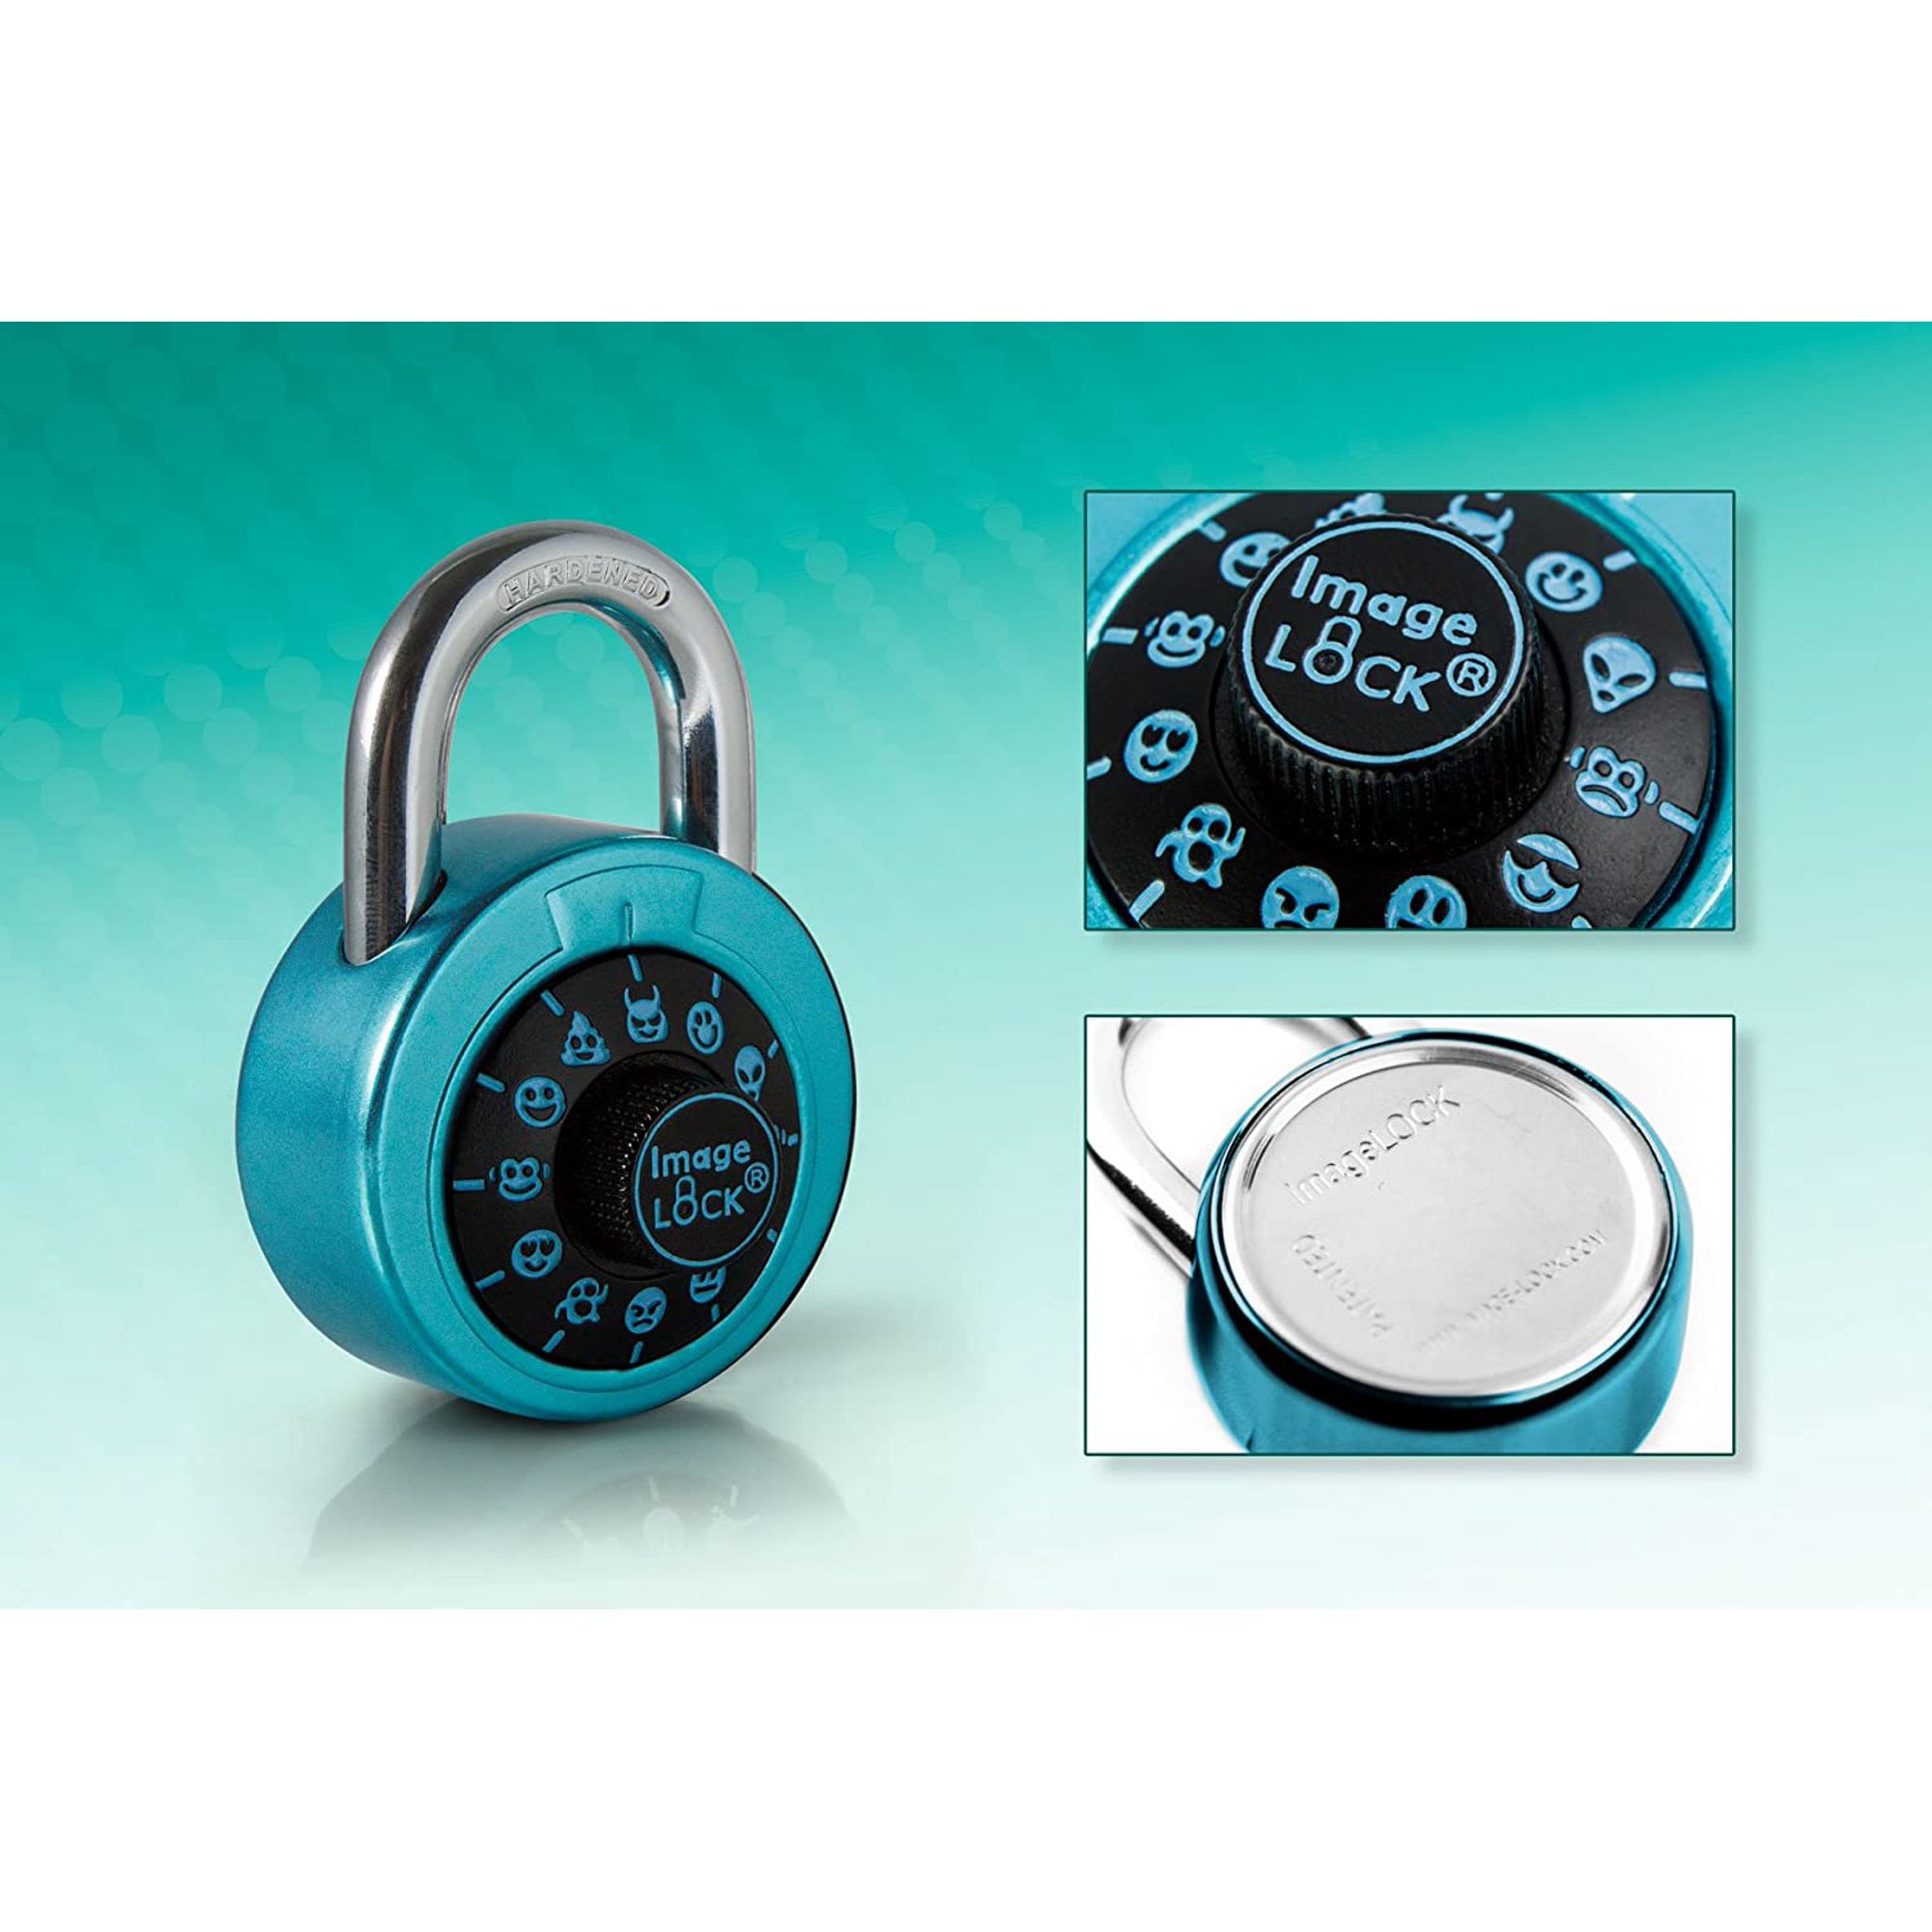 Combination Lock with Fun Emojis, ImageLOCK Patented Non-Resettable Combination Lock Without Administrative Key, Emoticons Instead of Numbers